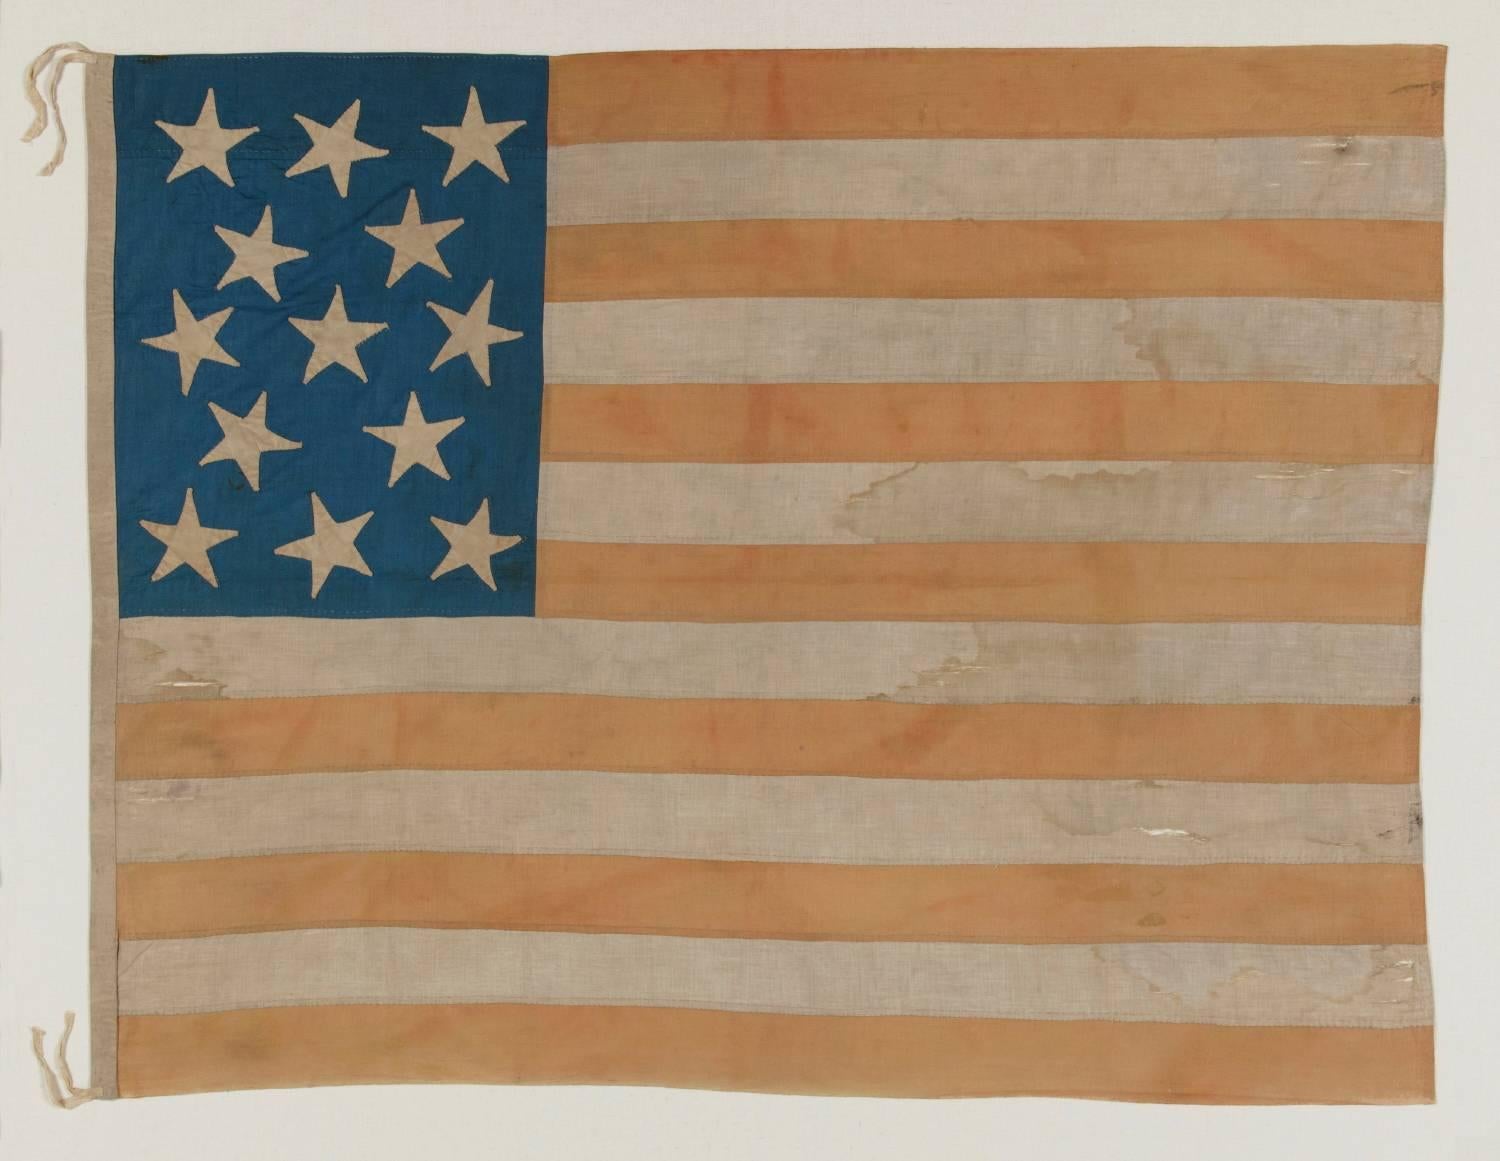 ENTIRELY HAND-SEWN AMERICAN NATIONAL FLAG WITH 13 STARS ON A TALL AND NARROW CANTON; A HOMEMADE EXAMPLE WITH INTERESTING PRESENTATION, MADE SOMETIME BETWEEN THE TAIL END OF THE CIVIL WAR AND THE 1876 CENTENNIAL:

Despite the fact that America hasn't